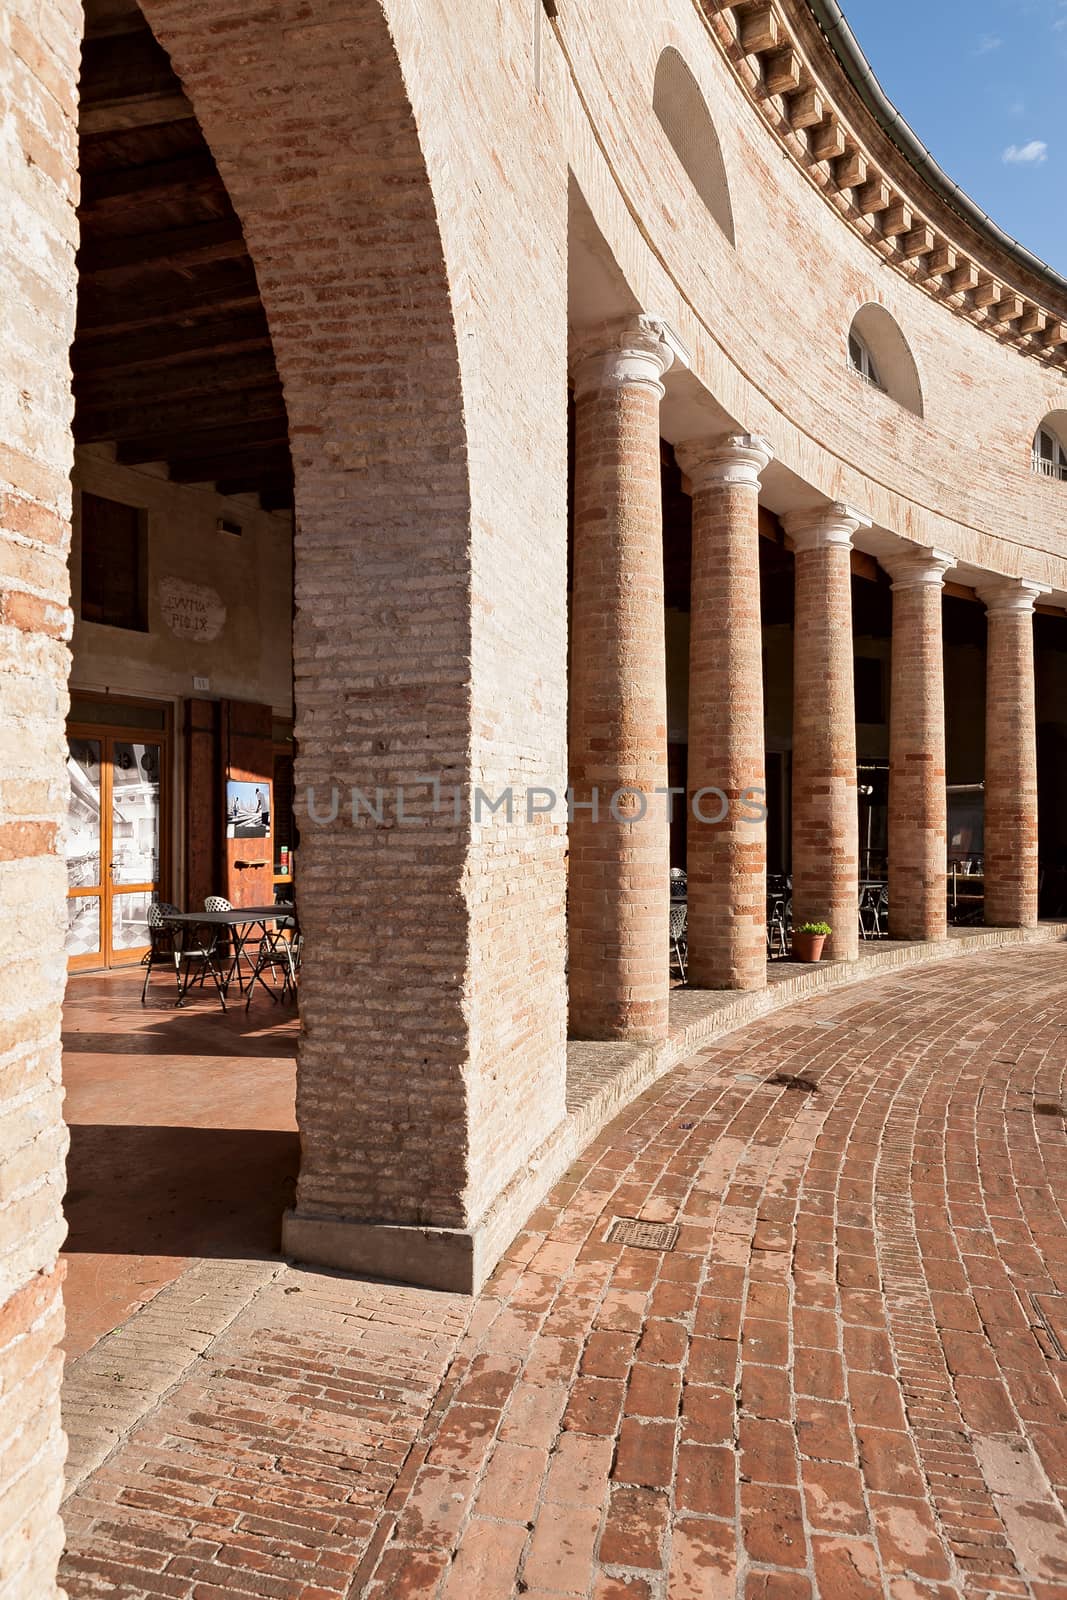 The colonnade of the ancient forum